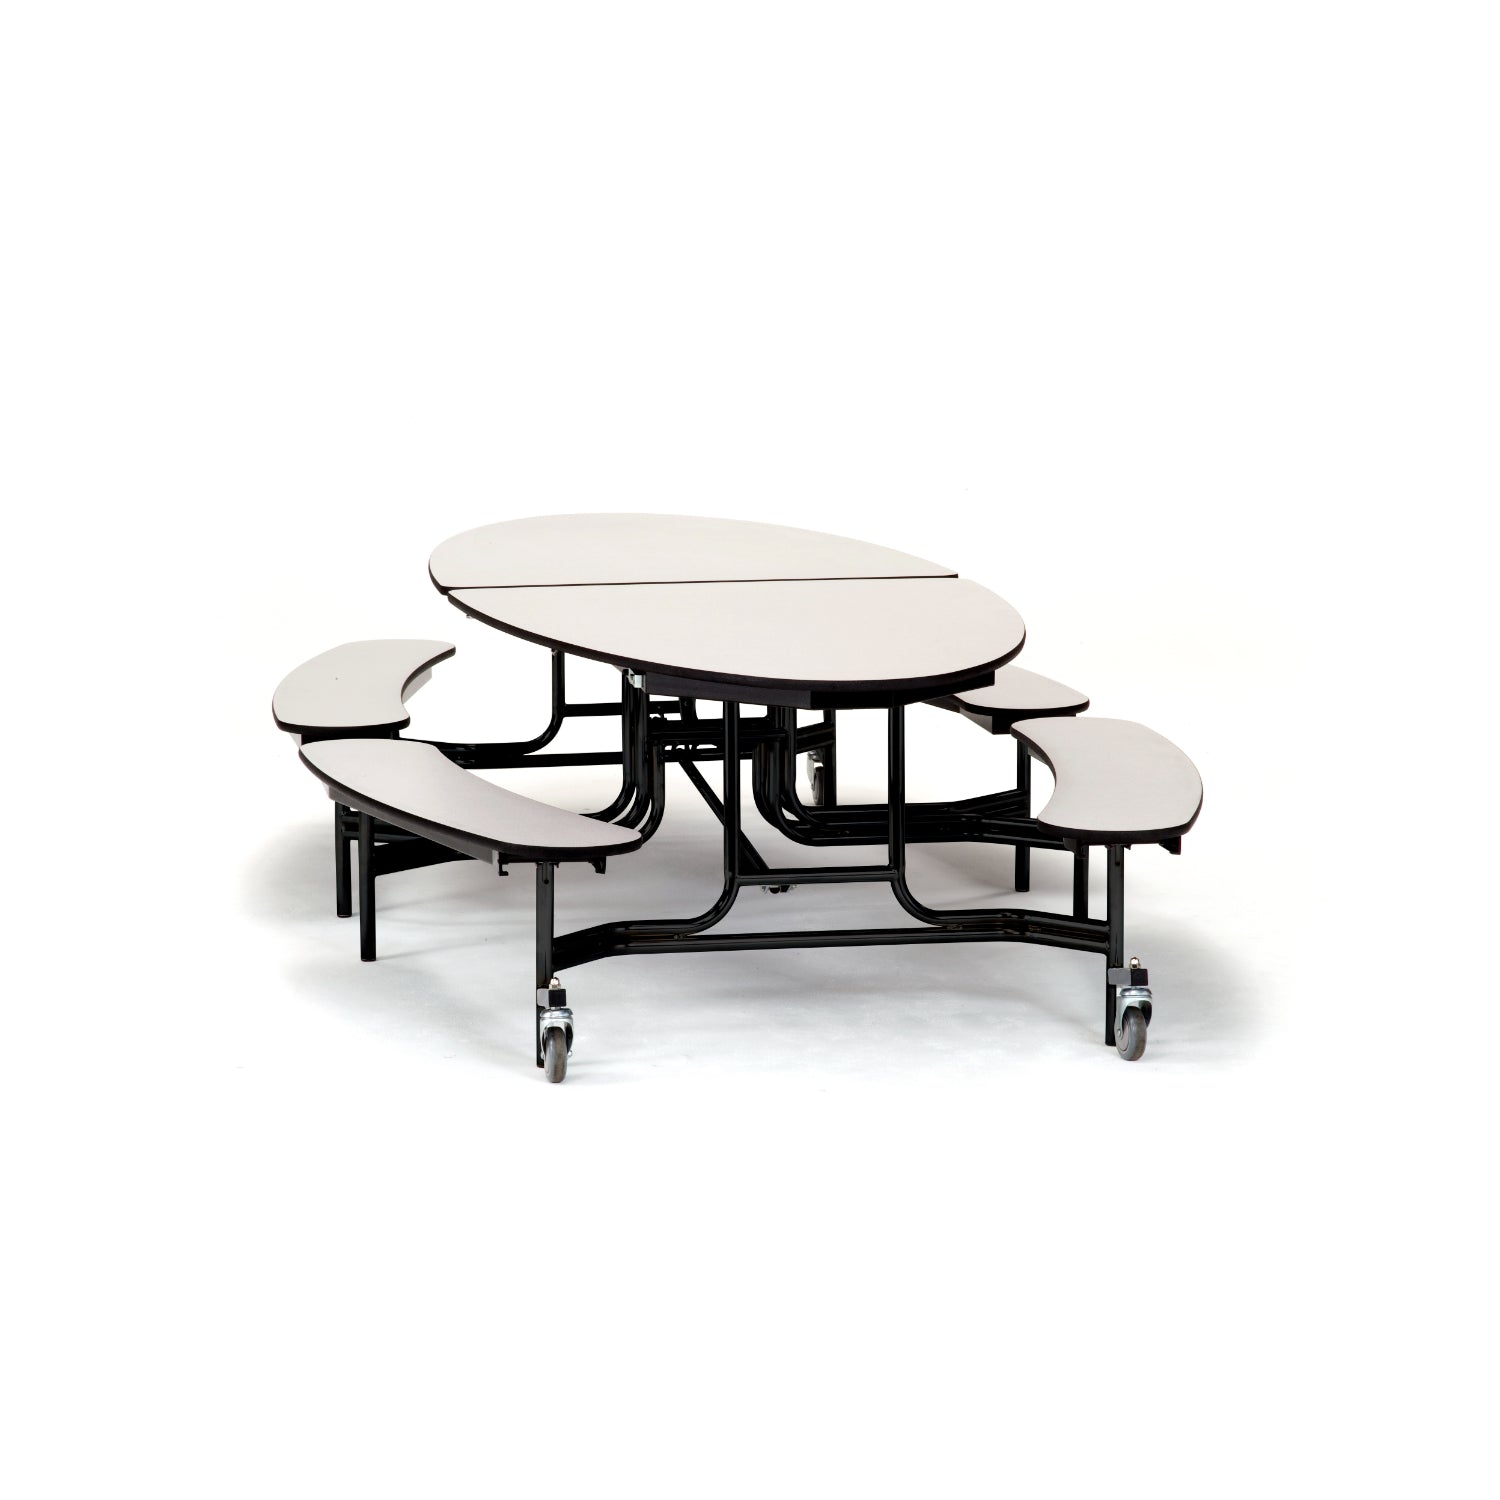 Mobile Cafeteria Table with Benches, 10' Elliptical, MDF Core, Black ProtectEdge, Textured Black Frame